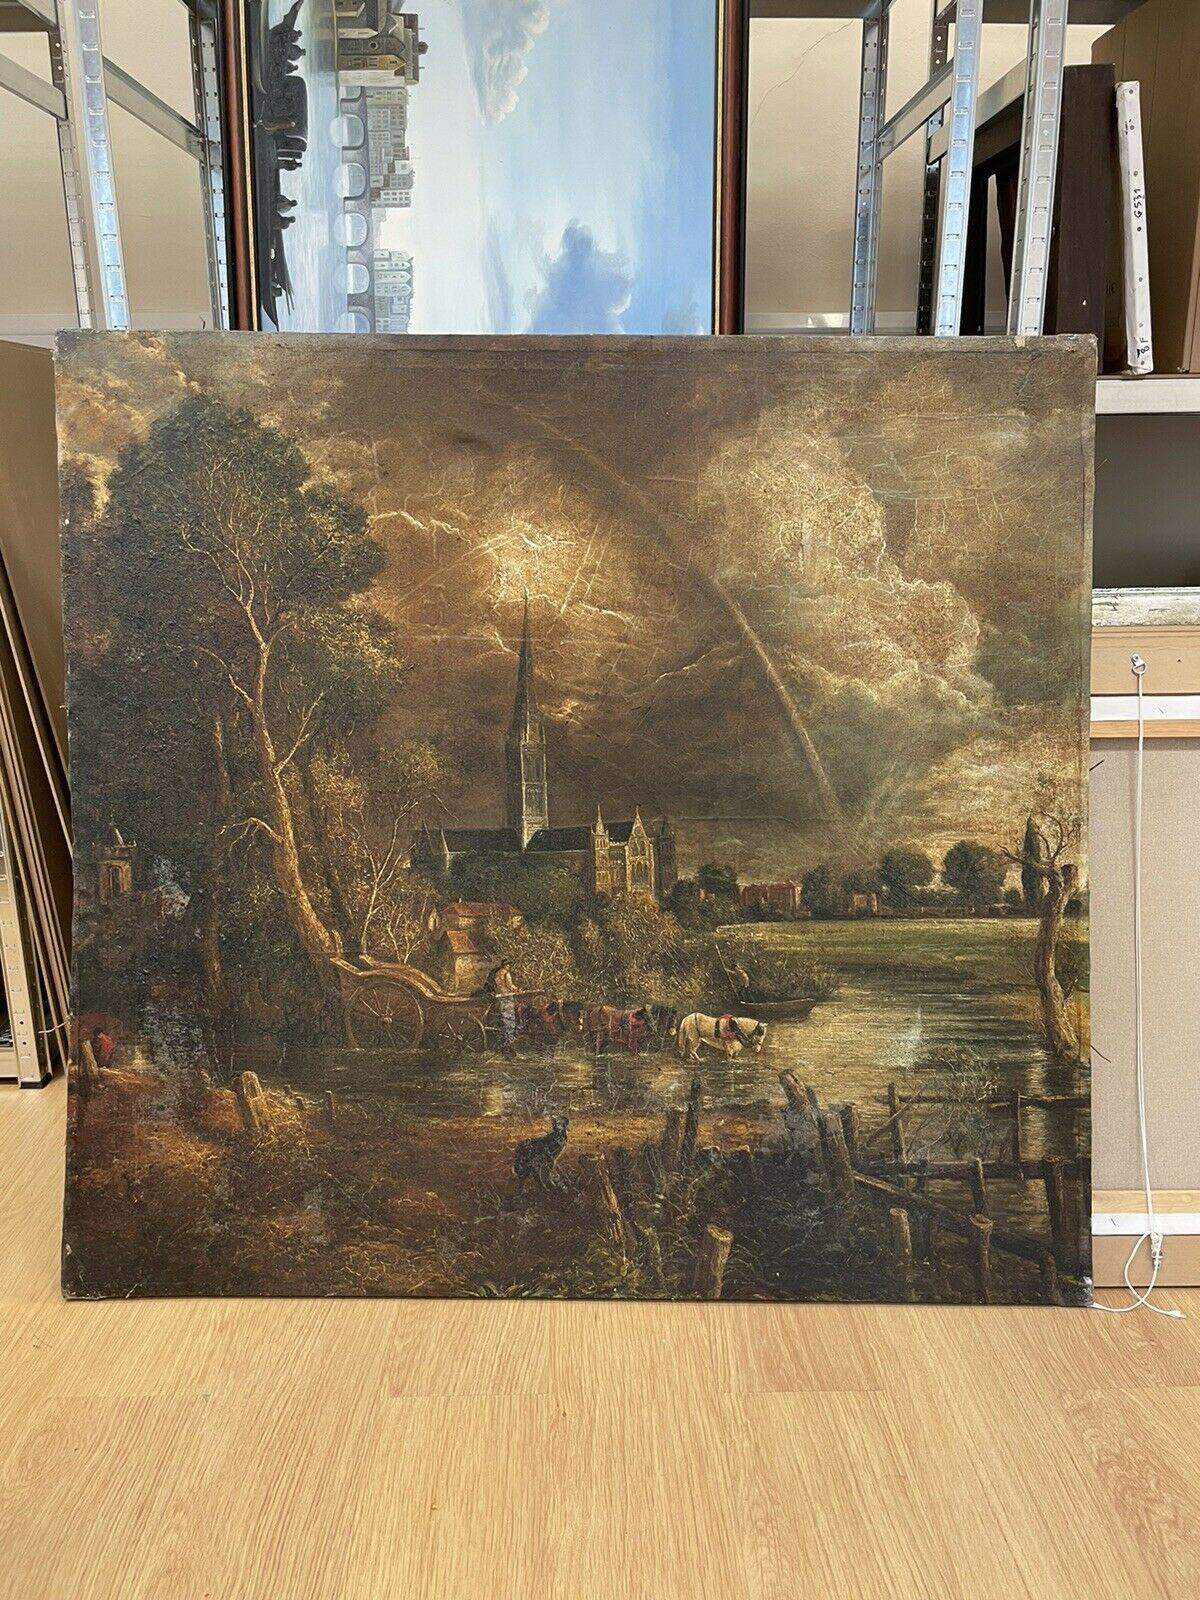 MIGUEL CANALS STUDIO - MASSIVE OIL PAINTING AFTER JOHN CONSTABLE SALISBURY CATH - Painting by Miguel Canals Studio